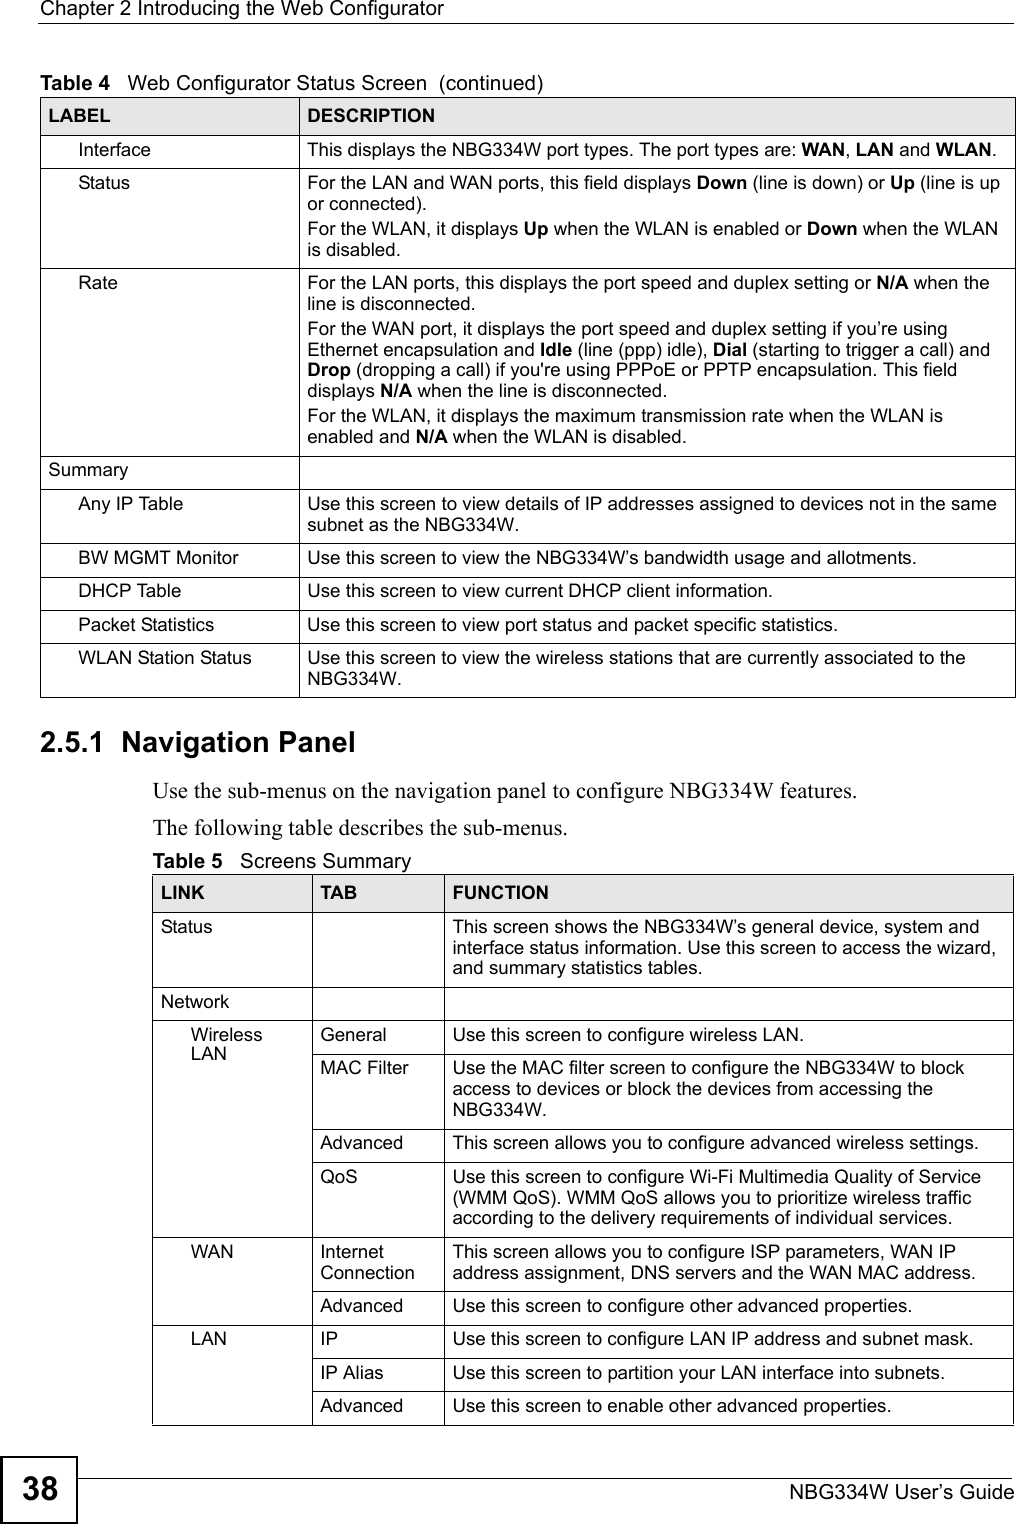 Chapter 2 Introducing the Web ConfiguratorNBG334W User’s Guide382.5.1  Navigation PanelUse the sub-menus on the navigation panel to configure NBG334W features. The following table describes the sub-menus.Interface This displays the NBG334W port types. The port types are: WAN, LAN and WLAN.Status For the LAN and WAN ports, this field displays Down (line is down) or Up (line is up or connected).For the WLAN, it displays Up when the WLAN is enabled or Down when the WLAN is disabled.Rate For the LAN ports, this displays the port speed and duplex setting or N/A when the line is disconnected.For the WAN port, it displays the port speed and duplex setting if you’re using Ethernet encapsulation and Idle (line (ppp) idle), Dial (starting to trigger a call) and Drop (dropping a call) if you&apos;re using PPPoE or PPTP encapsulation. This field displays N/A when the line is disconnected.For the WLAN, it displays the maximum transmission rate when the WLAN is enabled and N/A when the WLAN is disabled.SummaryAny IP Table Use this screen to view details of IP addresses assigned to devices not in the same subnet as the NBG334W.BW MGMT Monitor Use this screen to view the NBG334W’s bandwidth usage and allotments.DHCP Table Use this screen to view current DHCP client information.Packet Statistics Use this screen to view port status and packet specific statistics.WLAN Station Status Use this screen to view the wireless stations that are currently associated to the NBG334W.Table 4   Web Configurator Status Screen  (continued) LABEL DESCRIPTIONTable 5   Screens SummaryLINK TAB FUNCTIONStatus This screen shows the NBG334W’s general device, system and interface status information. Use this screen to access the wizard, and summary statistics tables.NetworkWireless LANGeneral Use this screen to configure wireless LAN.MAC Filter Use the MAC filter screen to configure the NBG334W to block access to devices or block the devices from accessing the NBG334W.Advanced This screen allows you to configure advanced wireless settings.QoS Use this screen to configure Wi-Fi Multimedia Quality of Service (WMM QoS). WMM QoS allows you to prioritize wireless traffic according to the delivery requirements of individual services.WAN Internet ConnectionThis screen allows you to configure ISP parameters, WAN IP address assignment, DNS servers and the WAN MAC address. Advanced Use this screen to configure other advanced properties.LAN IP Use this screen to configure LAN IP address and subnet mask.IP Alias Use this screen to partition your LAN interface into subnets.Advanced Use this screen to enable other advanced properties.